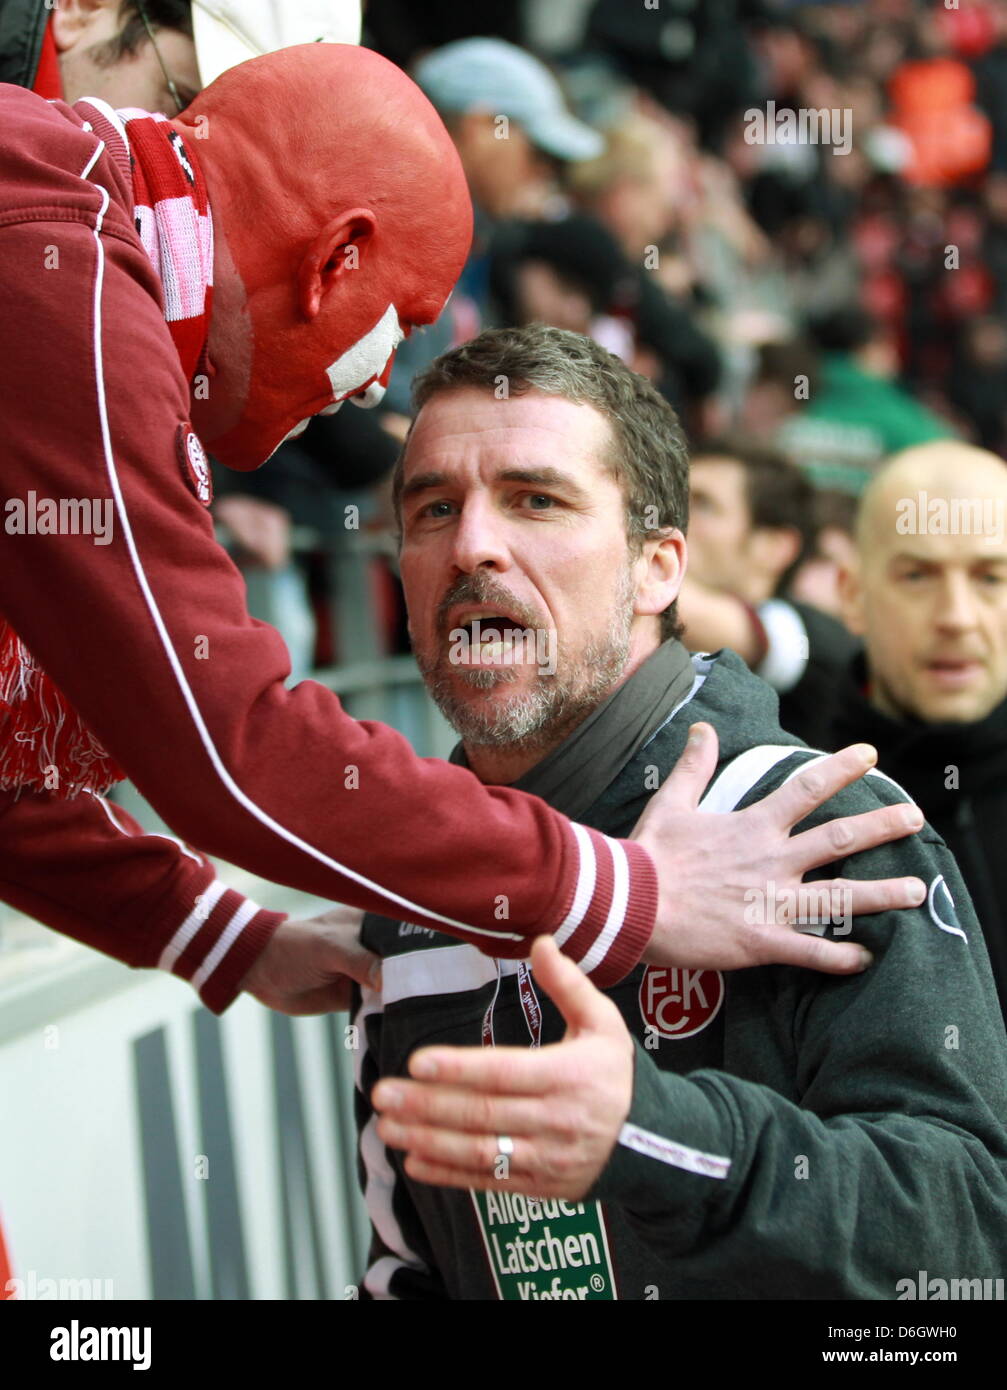 Kaiserslautern's head coach  Marco Kurz (R) talks to the fans after the German Bundesliga match between 1. FSV Mainz 05 and 1. FC Kaiserslautern at the Coface Arena in Mainz, Germany, 25 February 2012. Kaiserslautern lost 4-0. Photo: ROLAND HOLSCHNEIDER  (ATTENTION: EMBARGO CONDITIONS! The DFL permits the further utilisation of the pictures in IPTV, mobile services and other new te Stock Photo